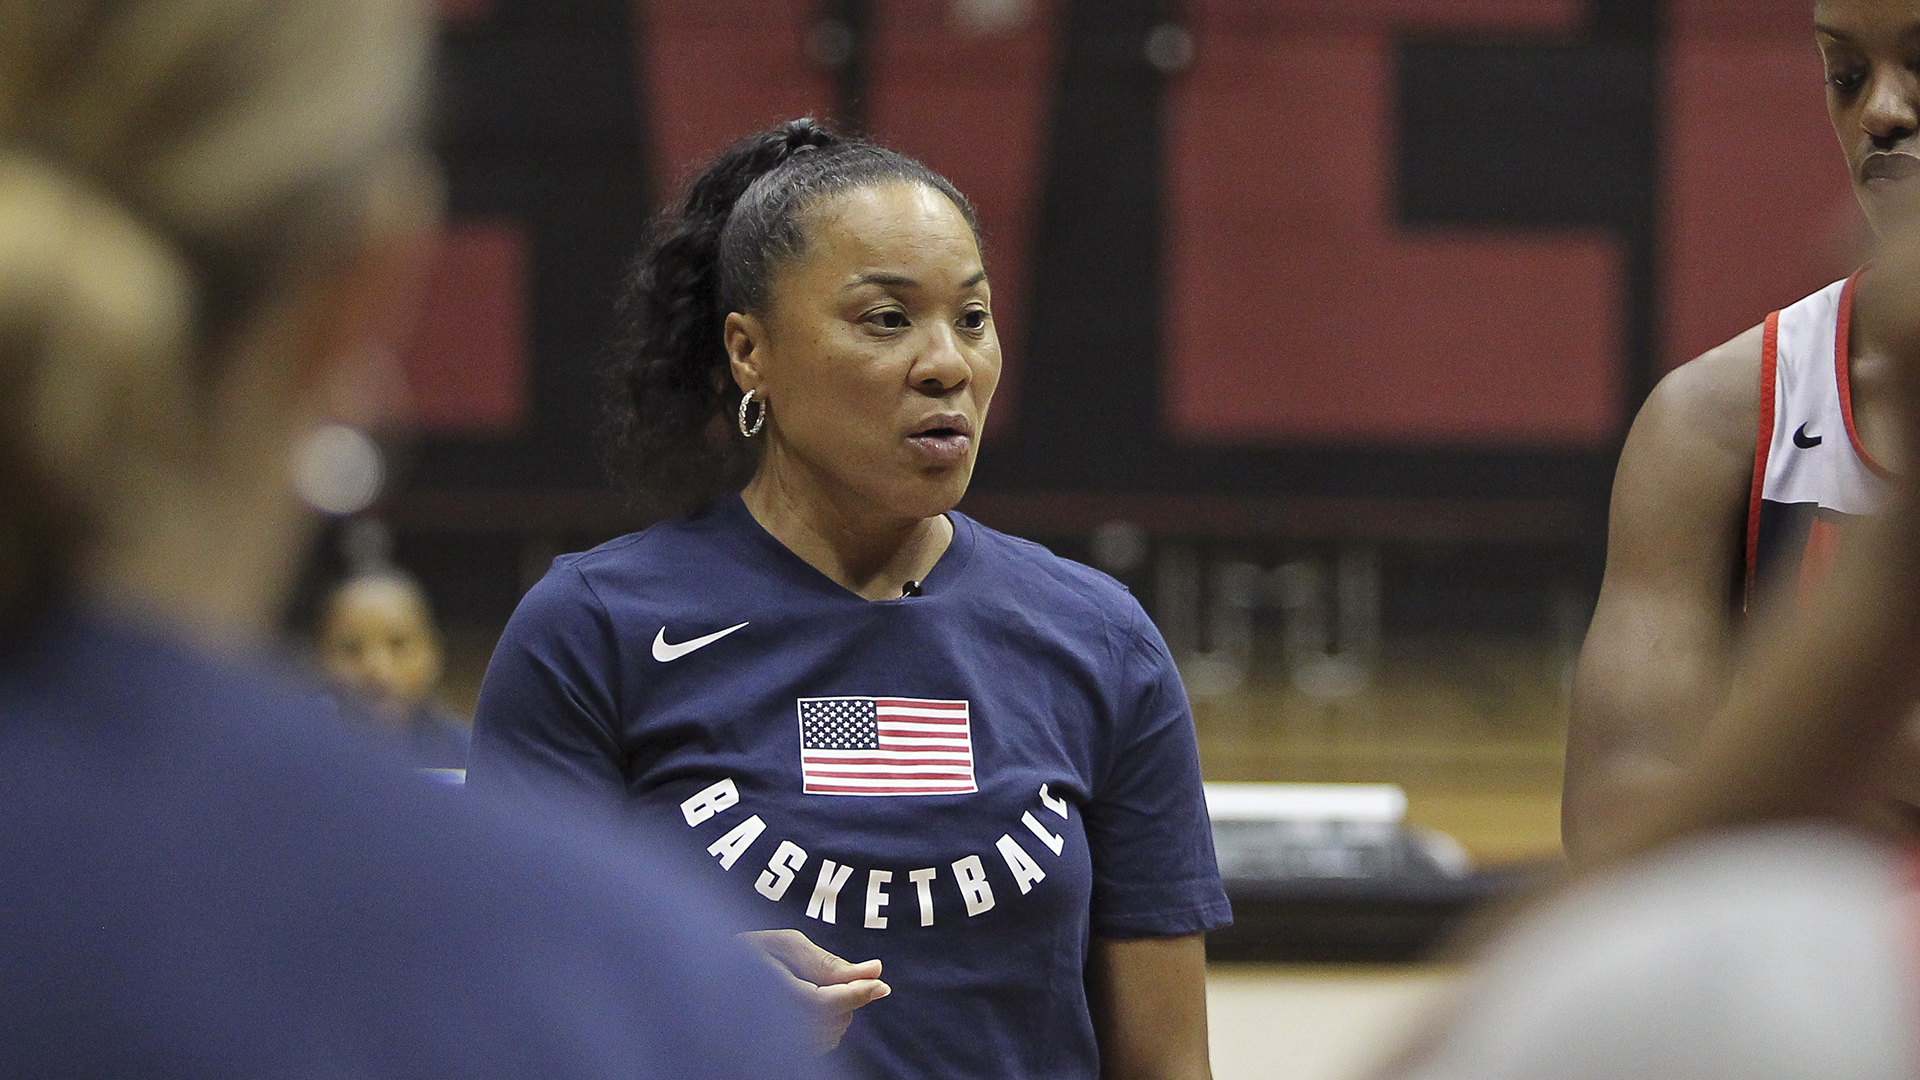 COLUMBIA, SC - SEPTEMBER 3: Dawn Staley of the 2018 USA Basketball Women's National Team coaches during training camp at the University of South Carolina on September 3, 2018 in Columbia, South Carolina. NOTE TO USER: User expressly acknowledges and agrees that, by downloading and/or using this Photograph, user is consenting to the terms and conditions of the Getty Images License Agreement. Mandatory Copyright Notice: Copyright 2018 NBAE (Photo by Travis Bell/NBAE via Getty Images)